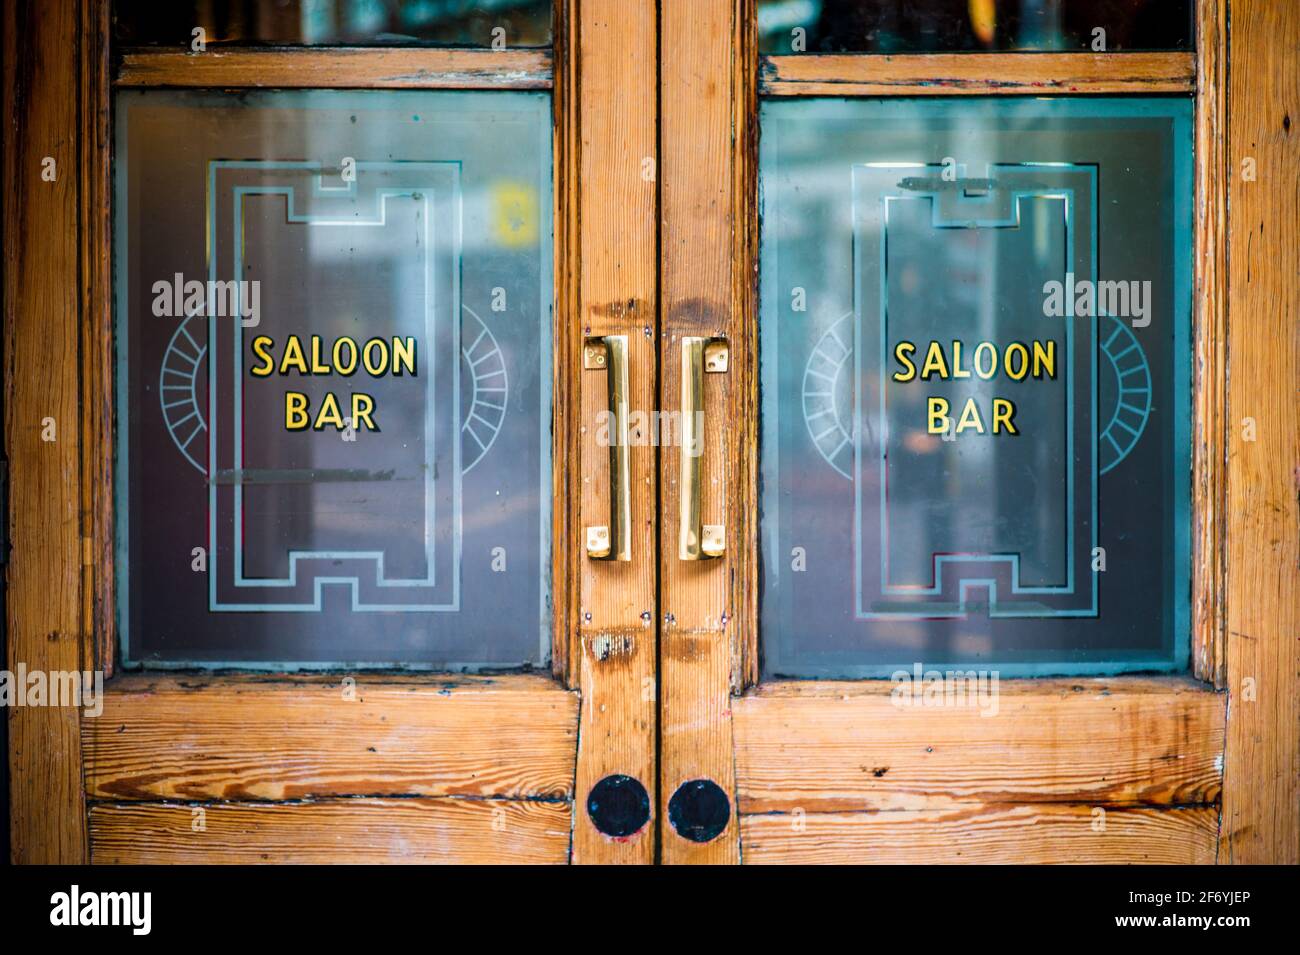 Saloon Bar Doors on a London Pub - Saloon Bar London. The Saloon Bar was usually the better furnished room of a public house. Stock Photo